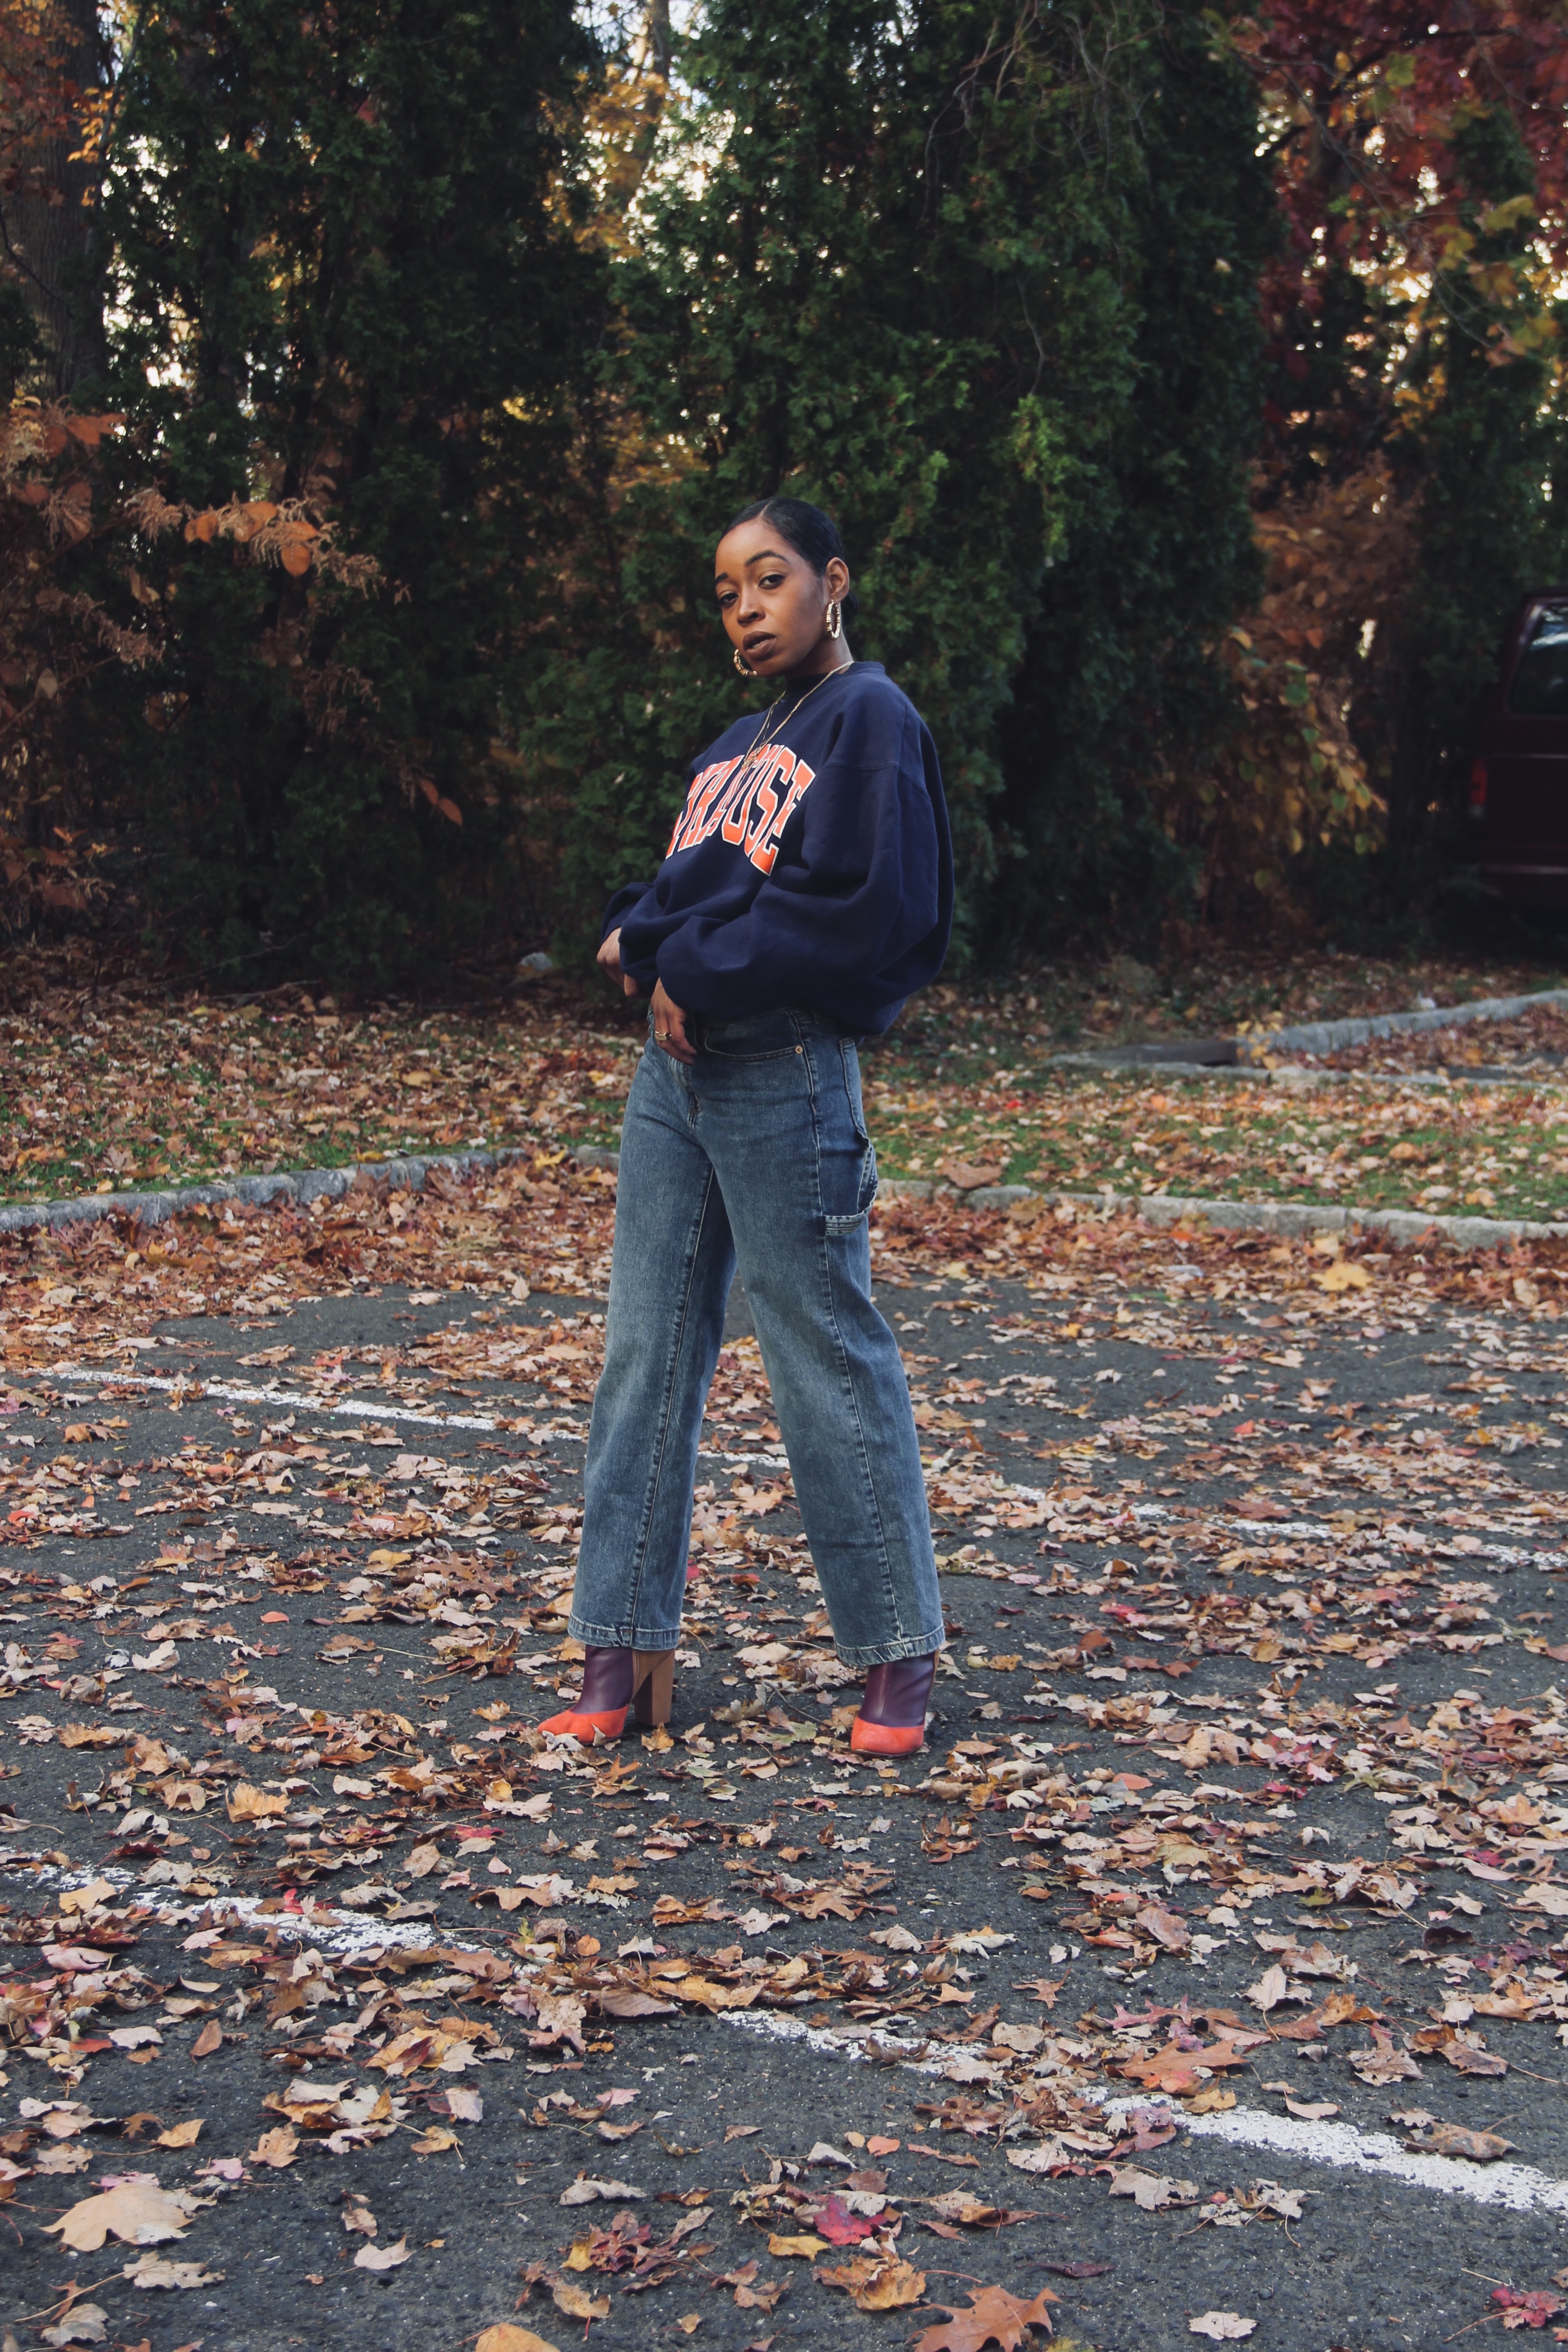 STACi P wearing a Syracuse vintage college sweatshirt with a MCM belt bag and color block ankle boots in a setting of colorful Fall leaves. 